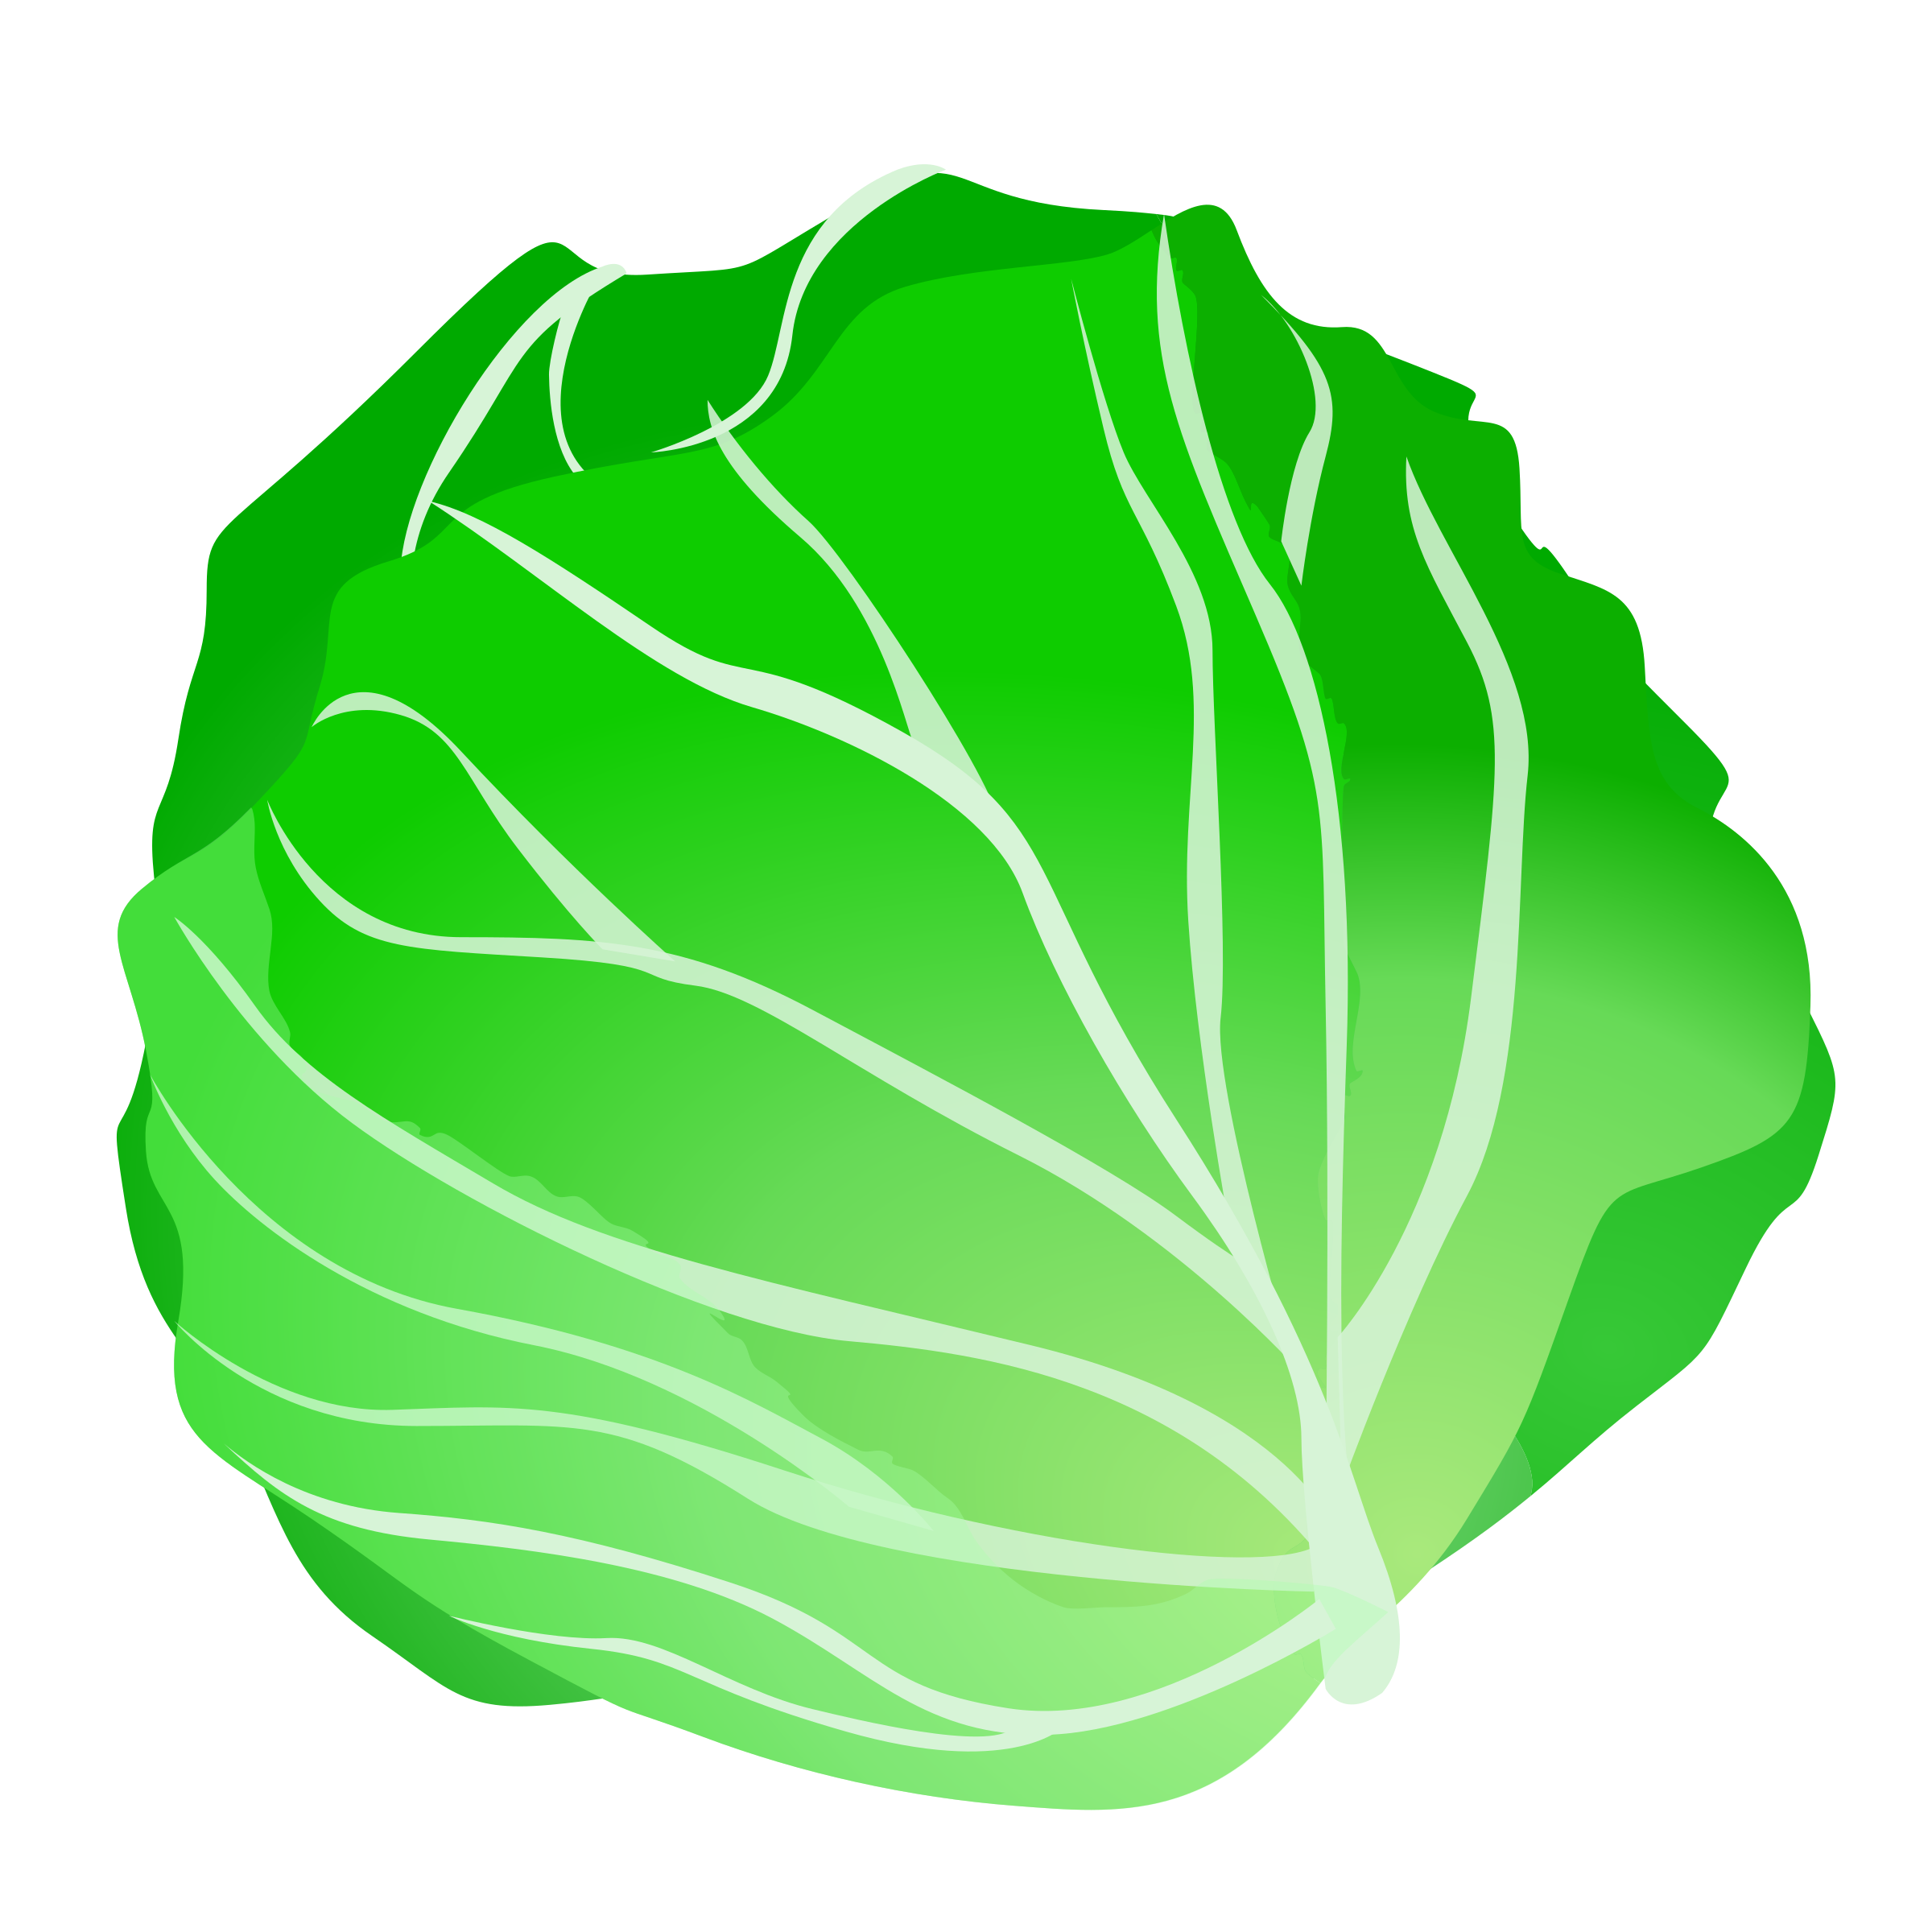 Free Cabbage Transparent, Download Free Cabbage Transparent png images